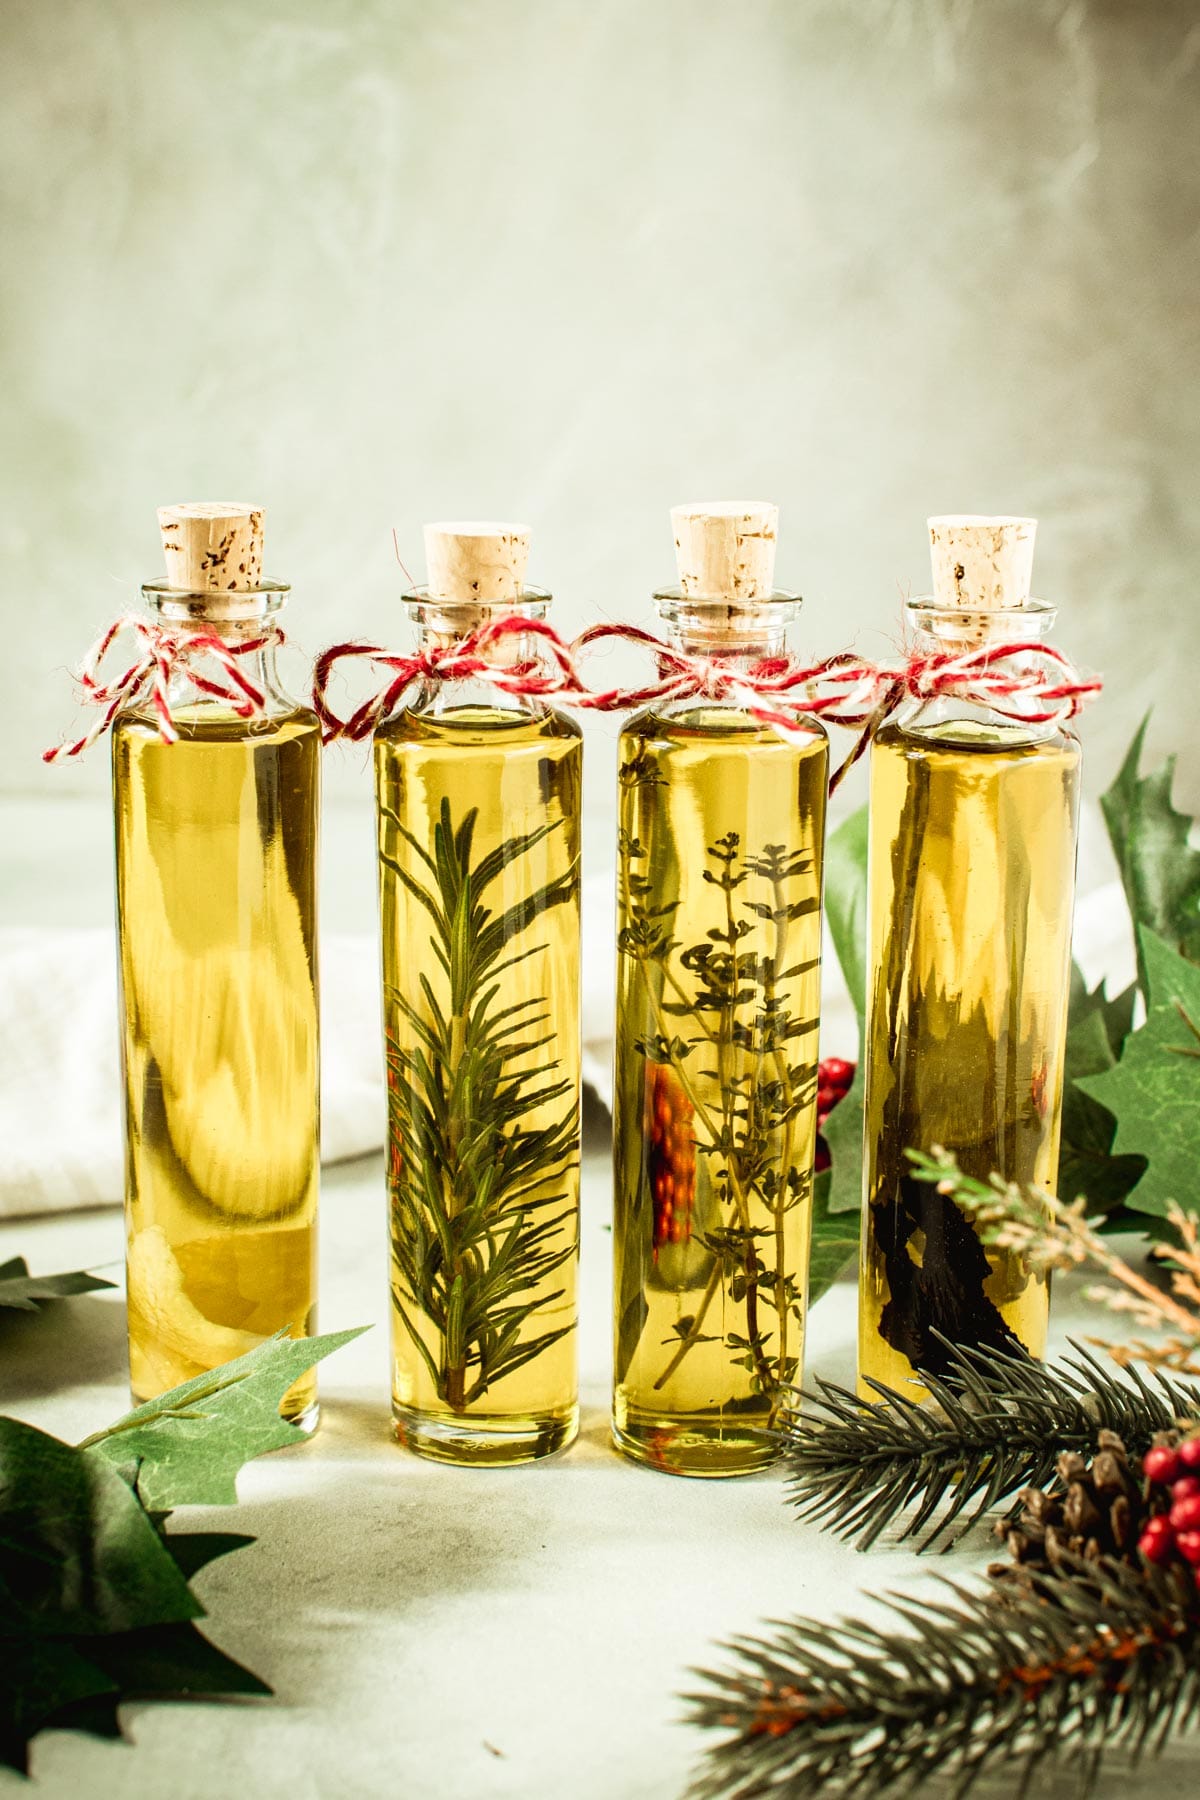 Cooking Articles - Five Surprising Uses For Infused Olive Oil